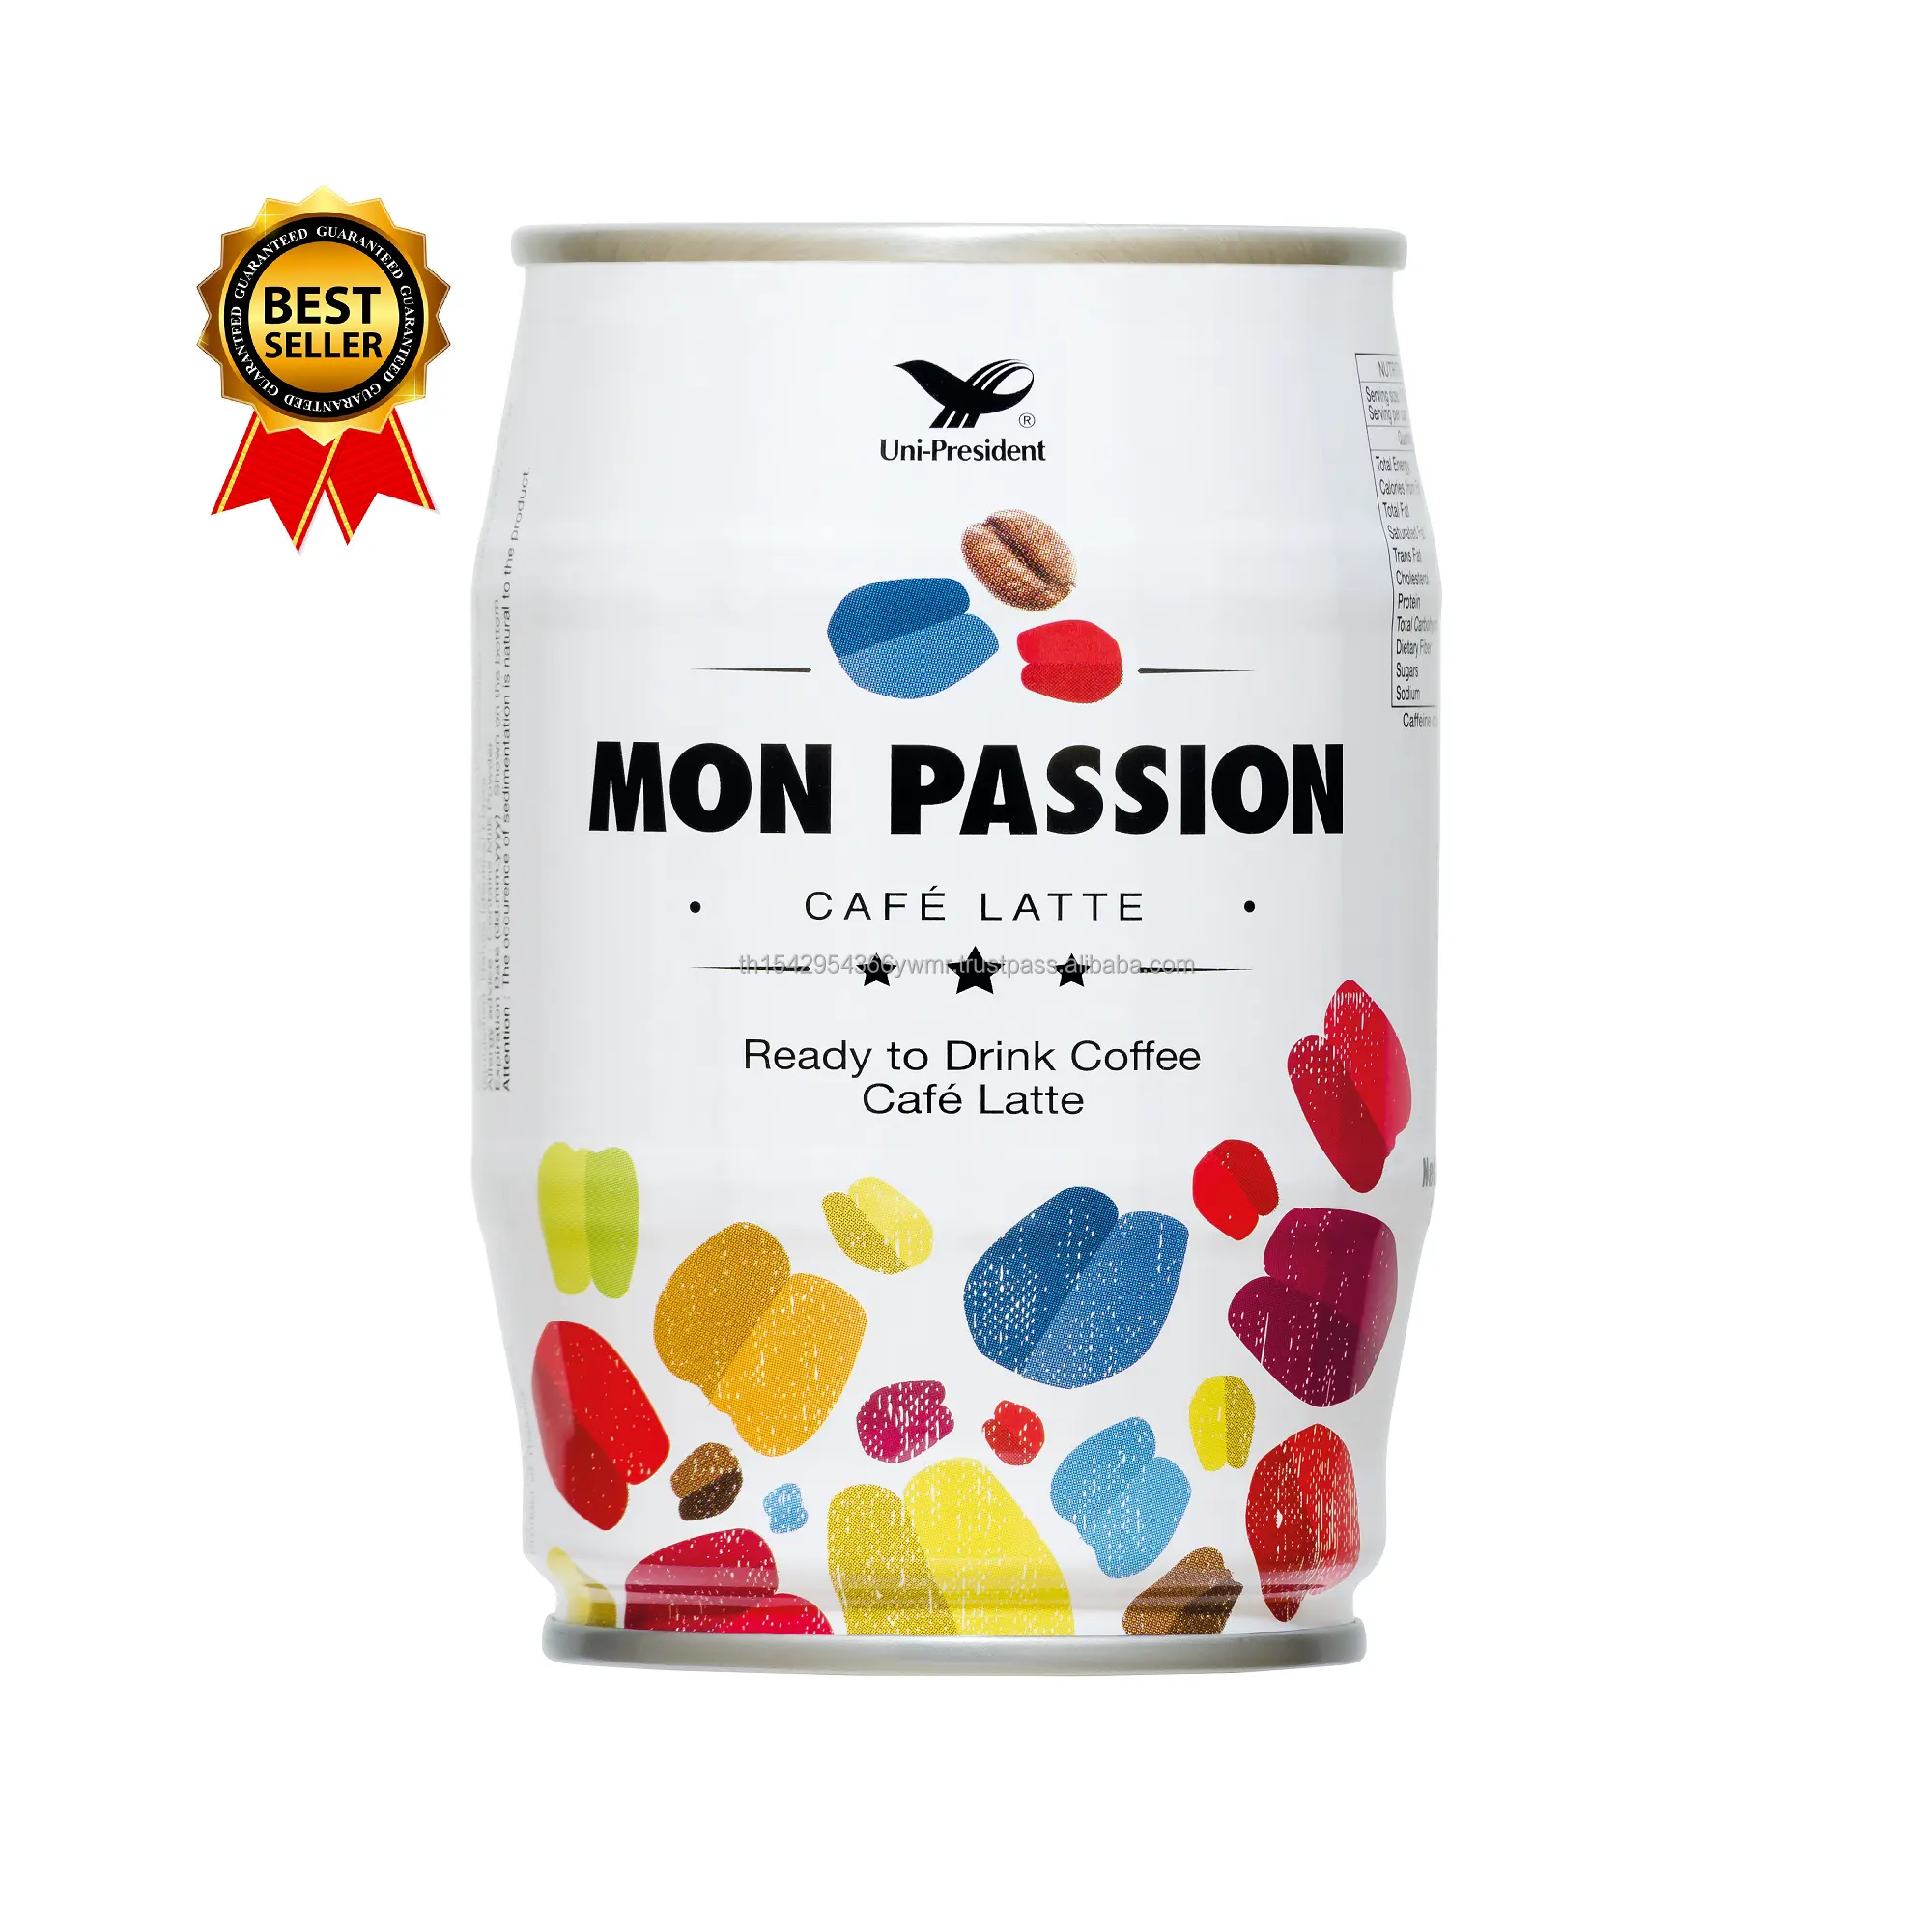 Mon Passion Cafe Latte (235ml) Best Seller Ready to Drink Arabica Coffee100% Smooth and Aromatic with Milk